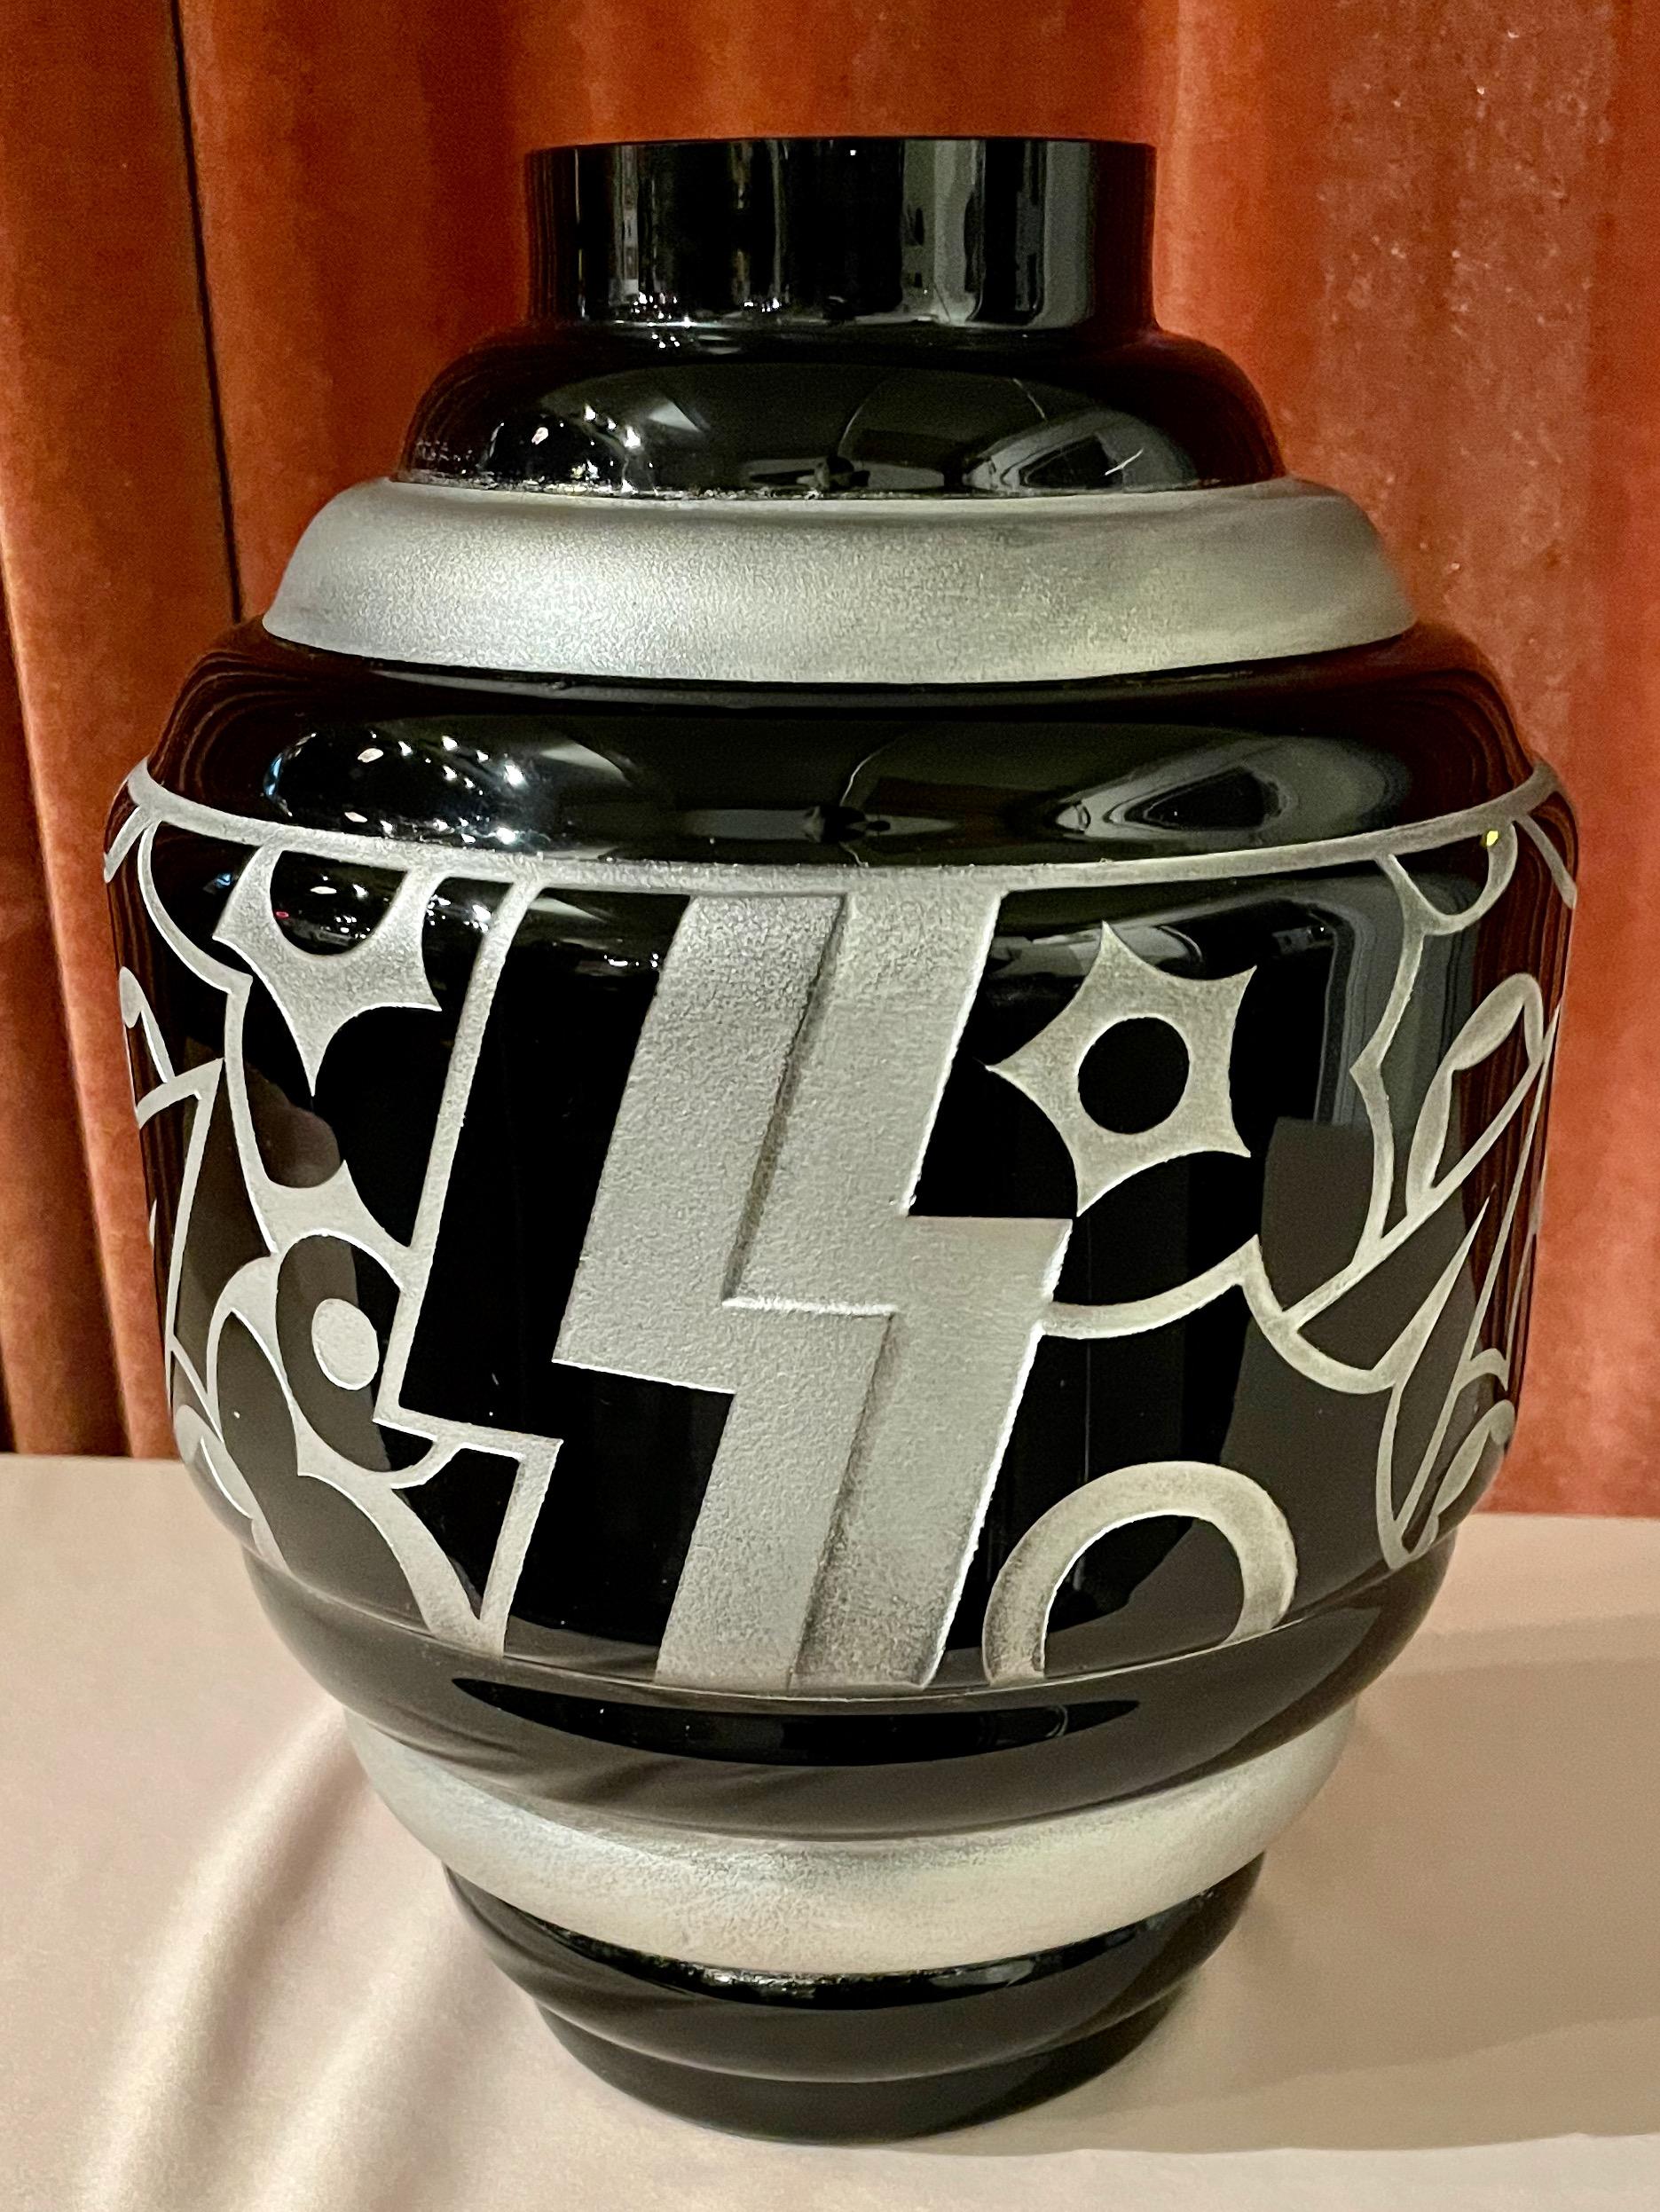 Art Deco acid etched modernist zigzag glass vase manufactured by Scalimont in Belgium circa 1925 designed by Peti. A. Dynamic zigzag design in black glass deeply etched with silver enamel paint to draw a strong contrast outlining the design which